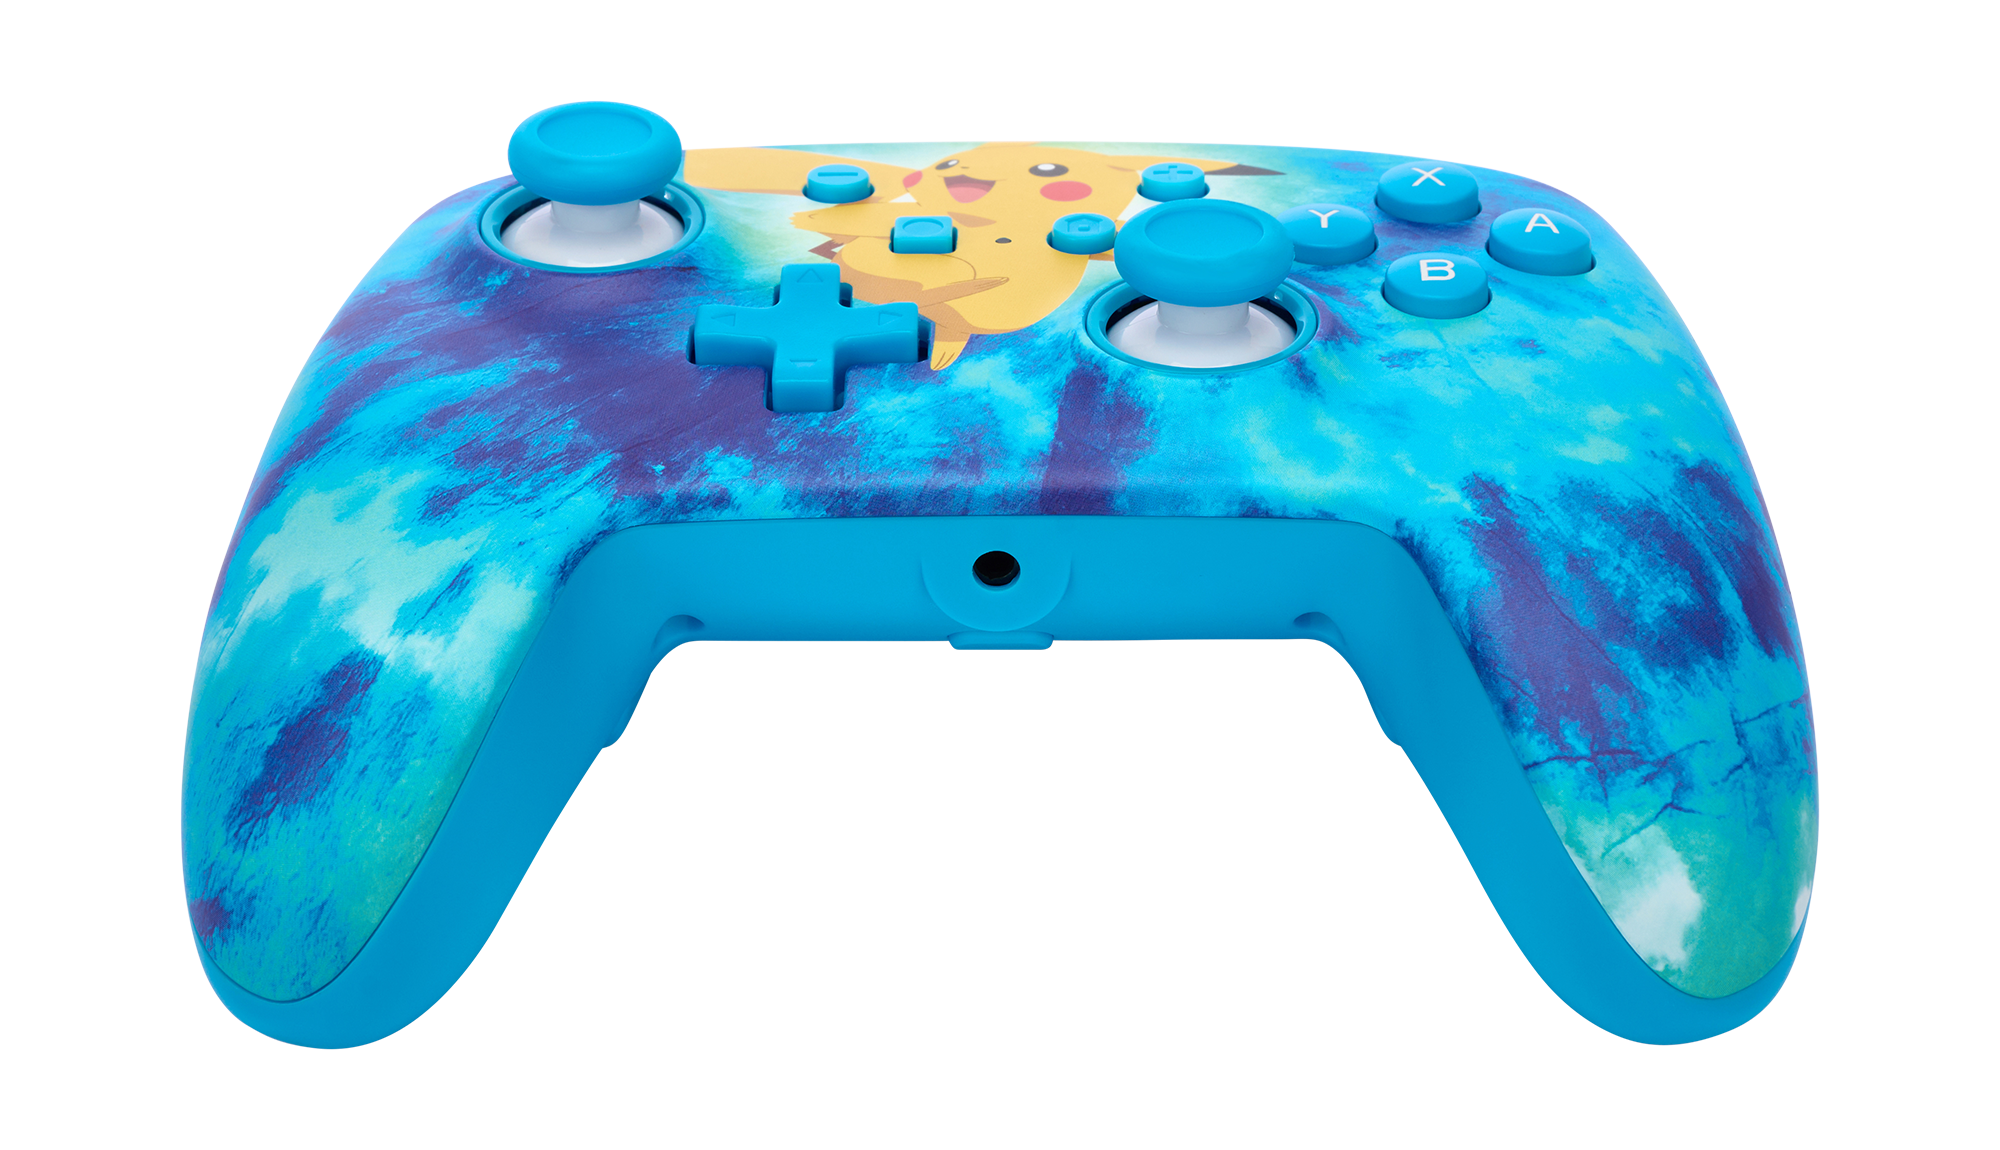 PowerA Enhanced Wired Controller for Nintendo Switch - Tie Dye 